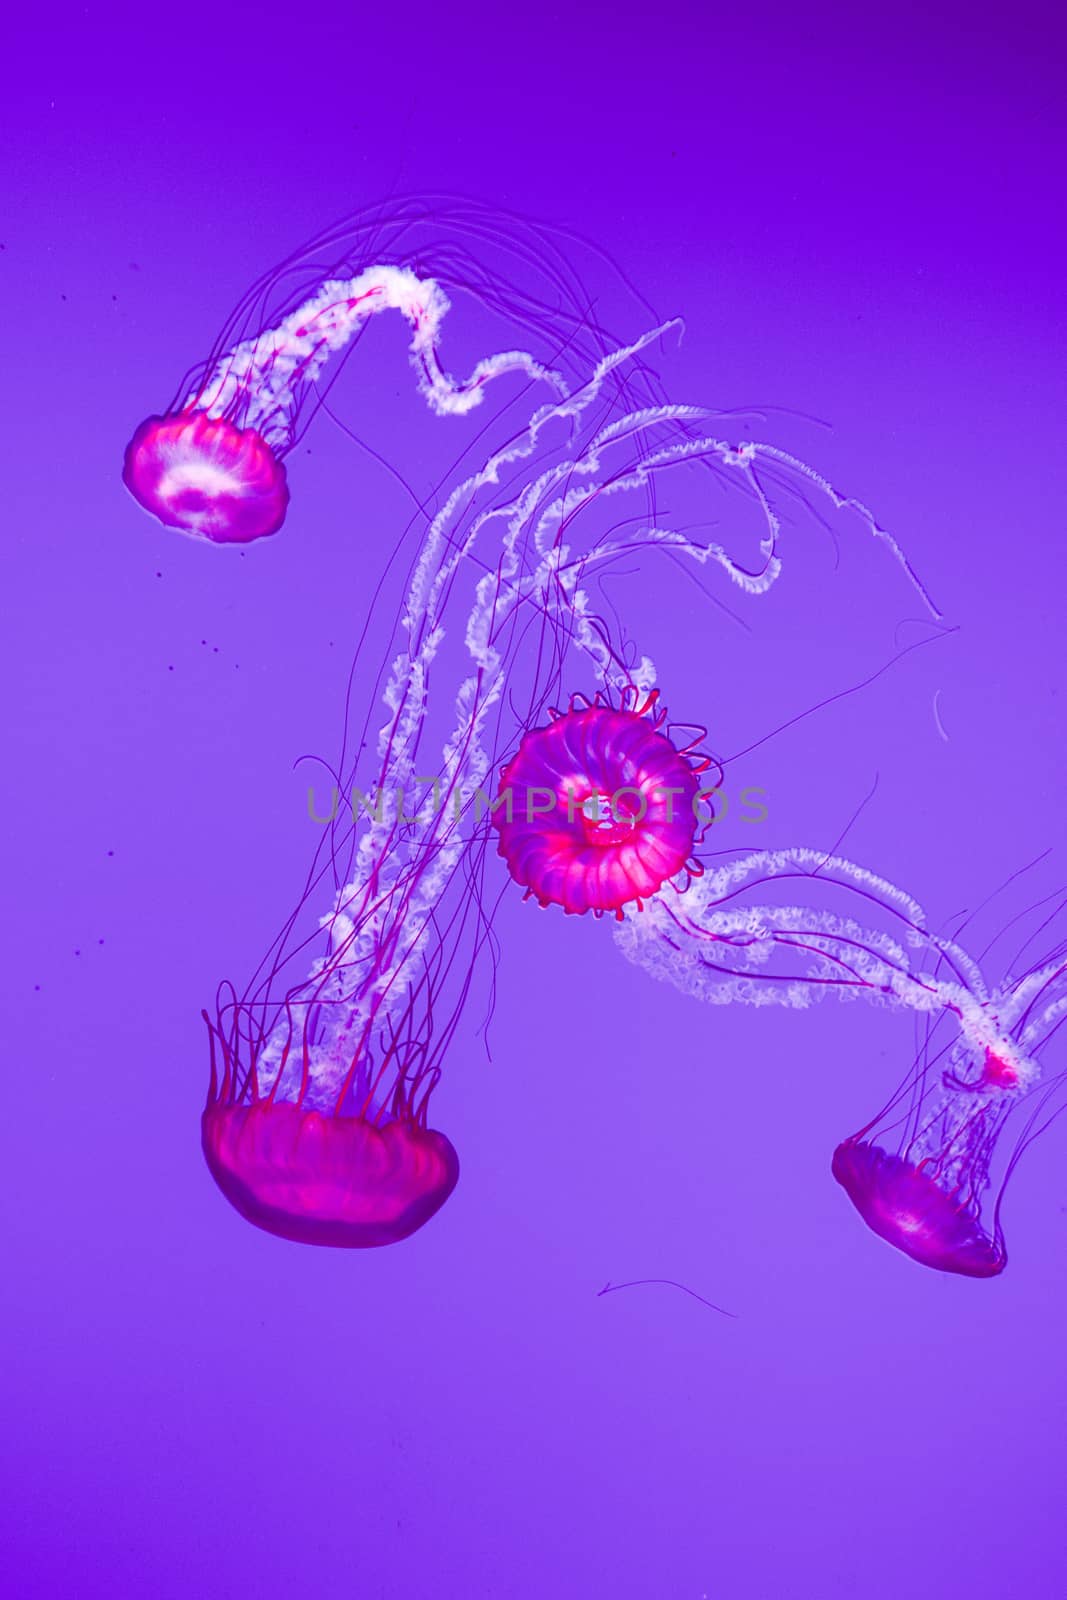 The beautiful bright and dangerous jellies Pacific sea nettles